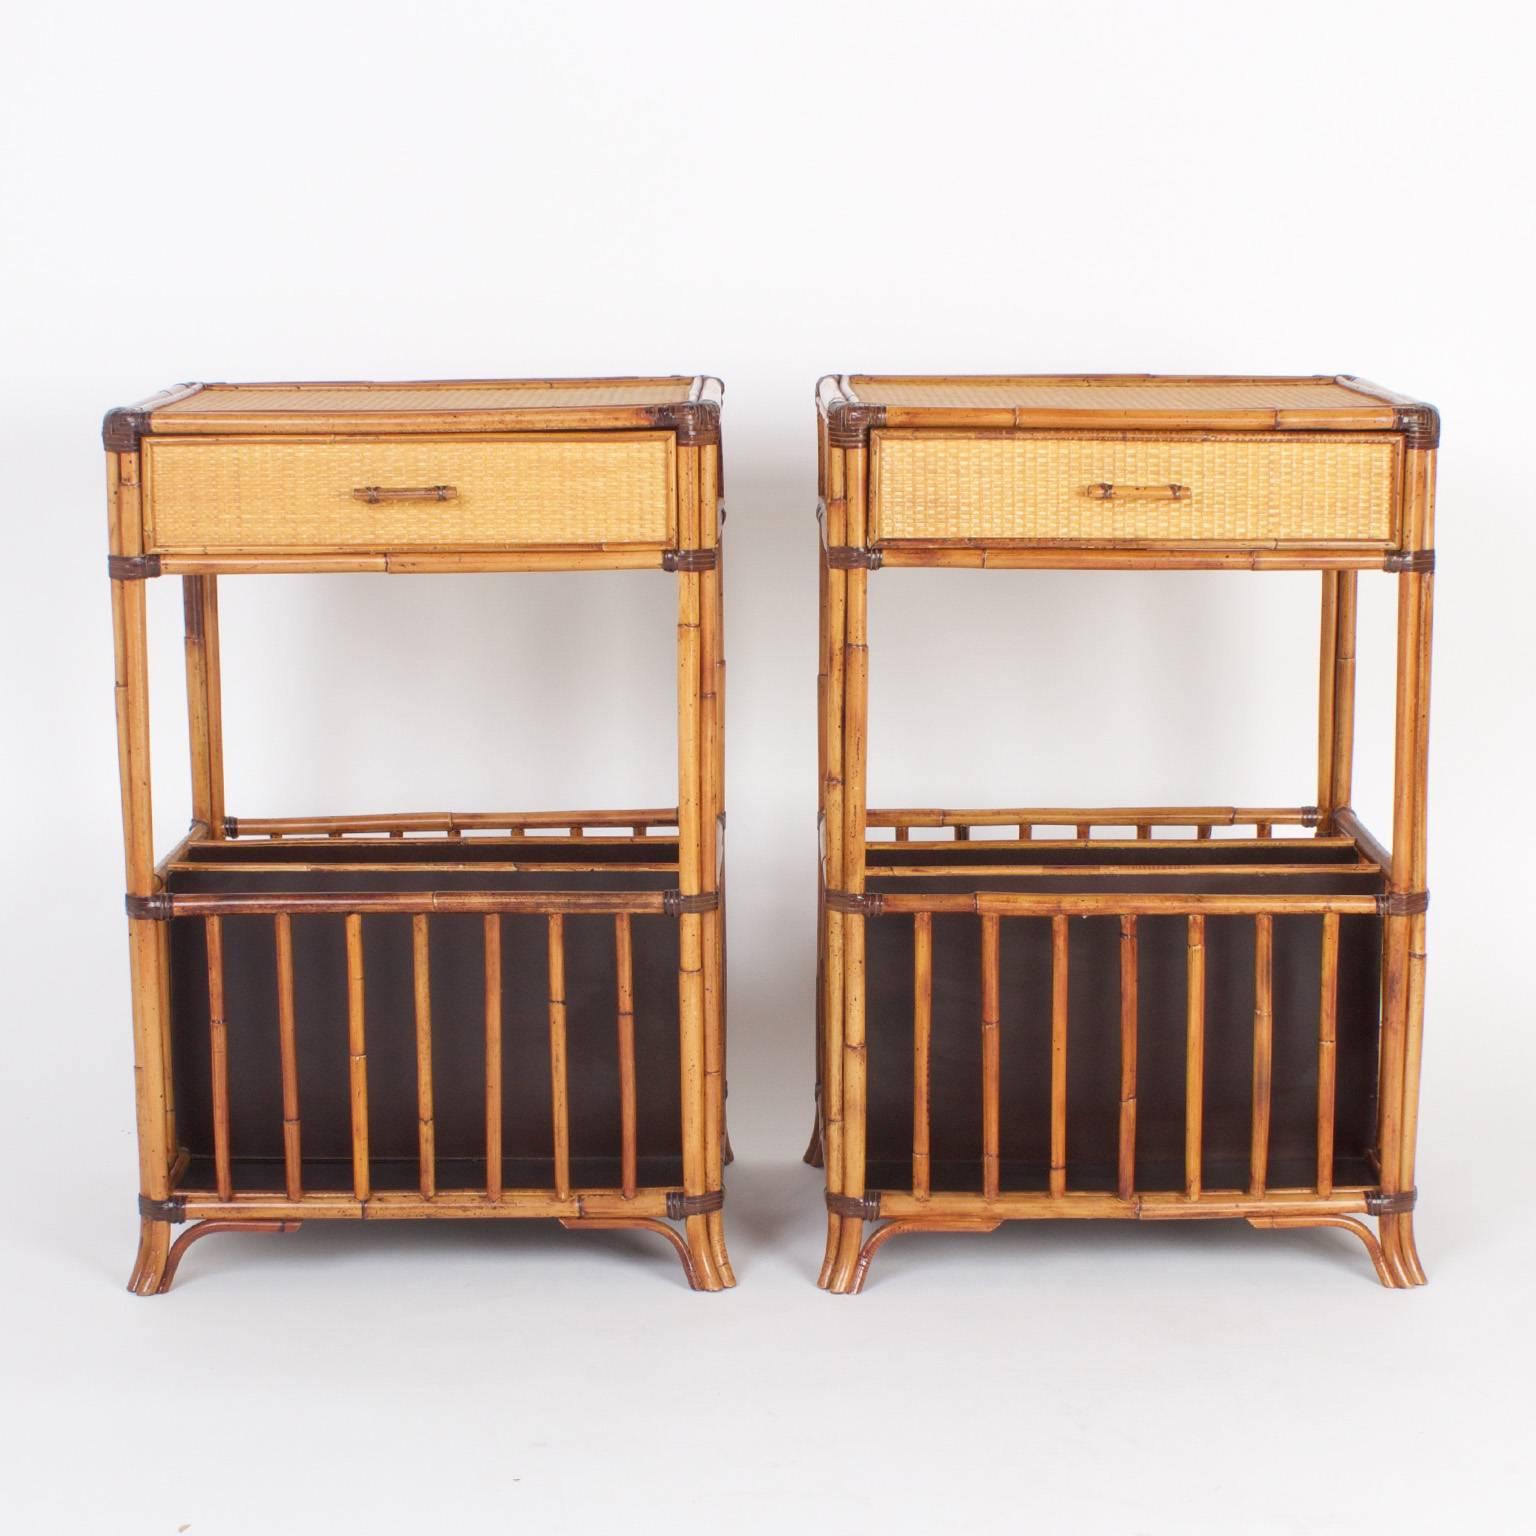 Handsome pair of Mid-Century nightstands crafted with bamboo and grasscloth. Featuring magazine or book rack in the bases and an appealing organic palette.